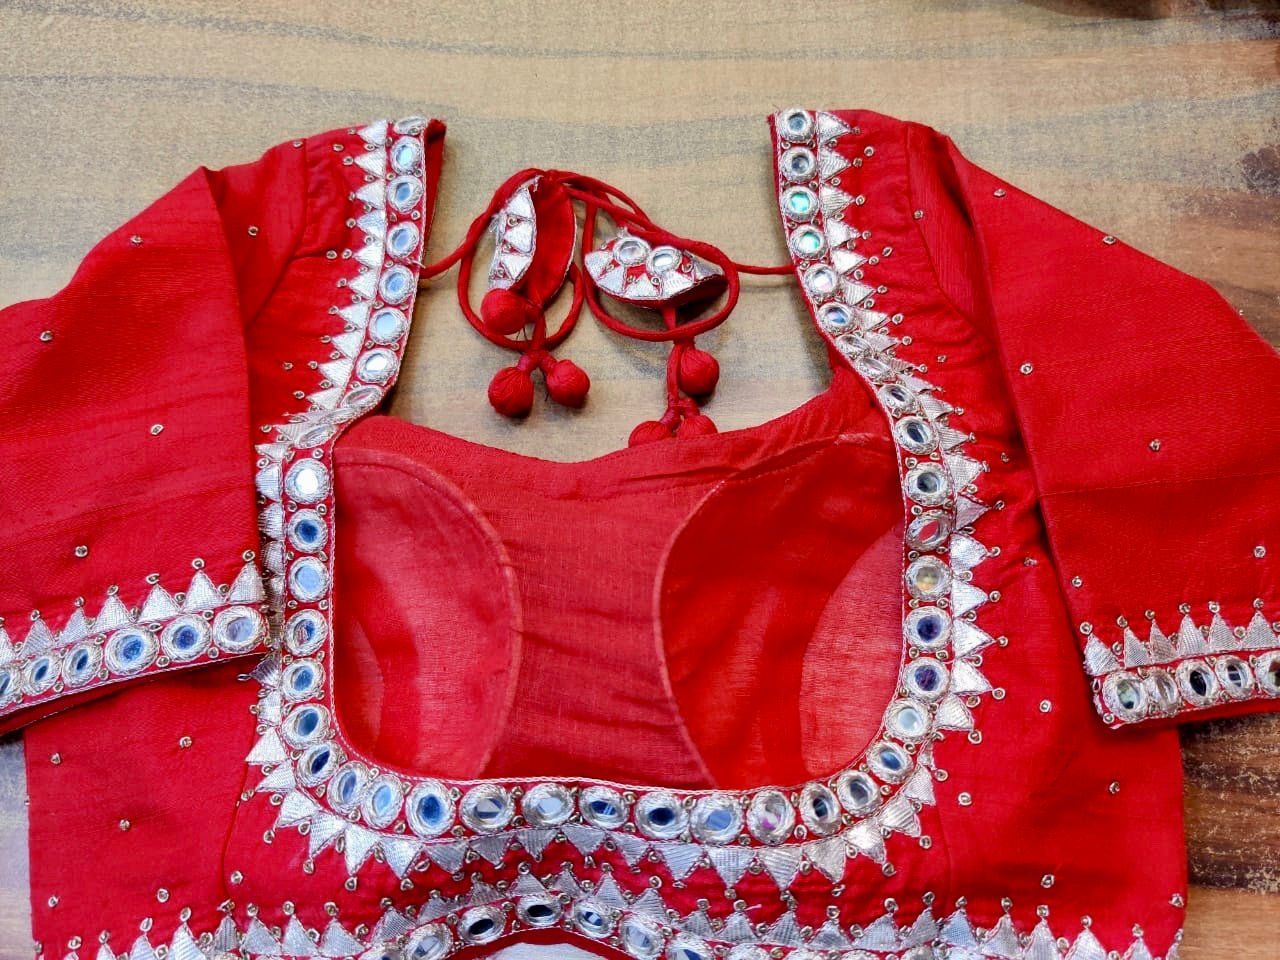 Buy beautiful red mirror embroidery designer sari blouse online in USA. Elevate your ethnic saree style with a tasteful collection of designer saree blouses, embroidered sari blouses, Banarasi blouses, silk saree blouses from Pure Elegance Indian clothing store in USA.-back